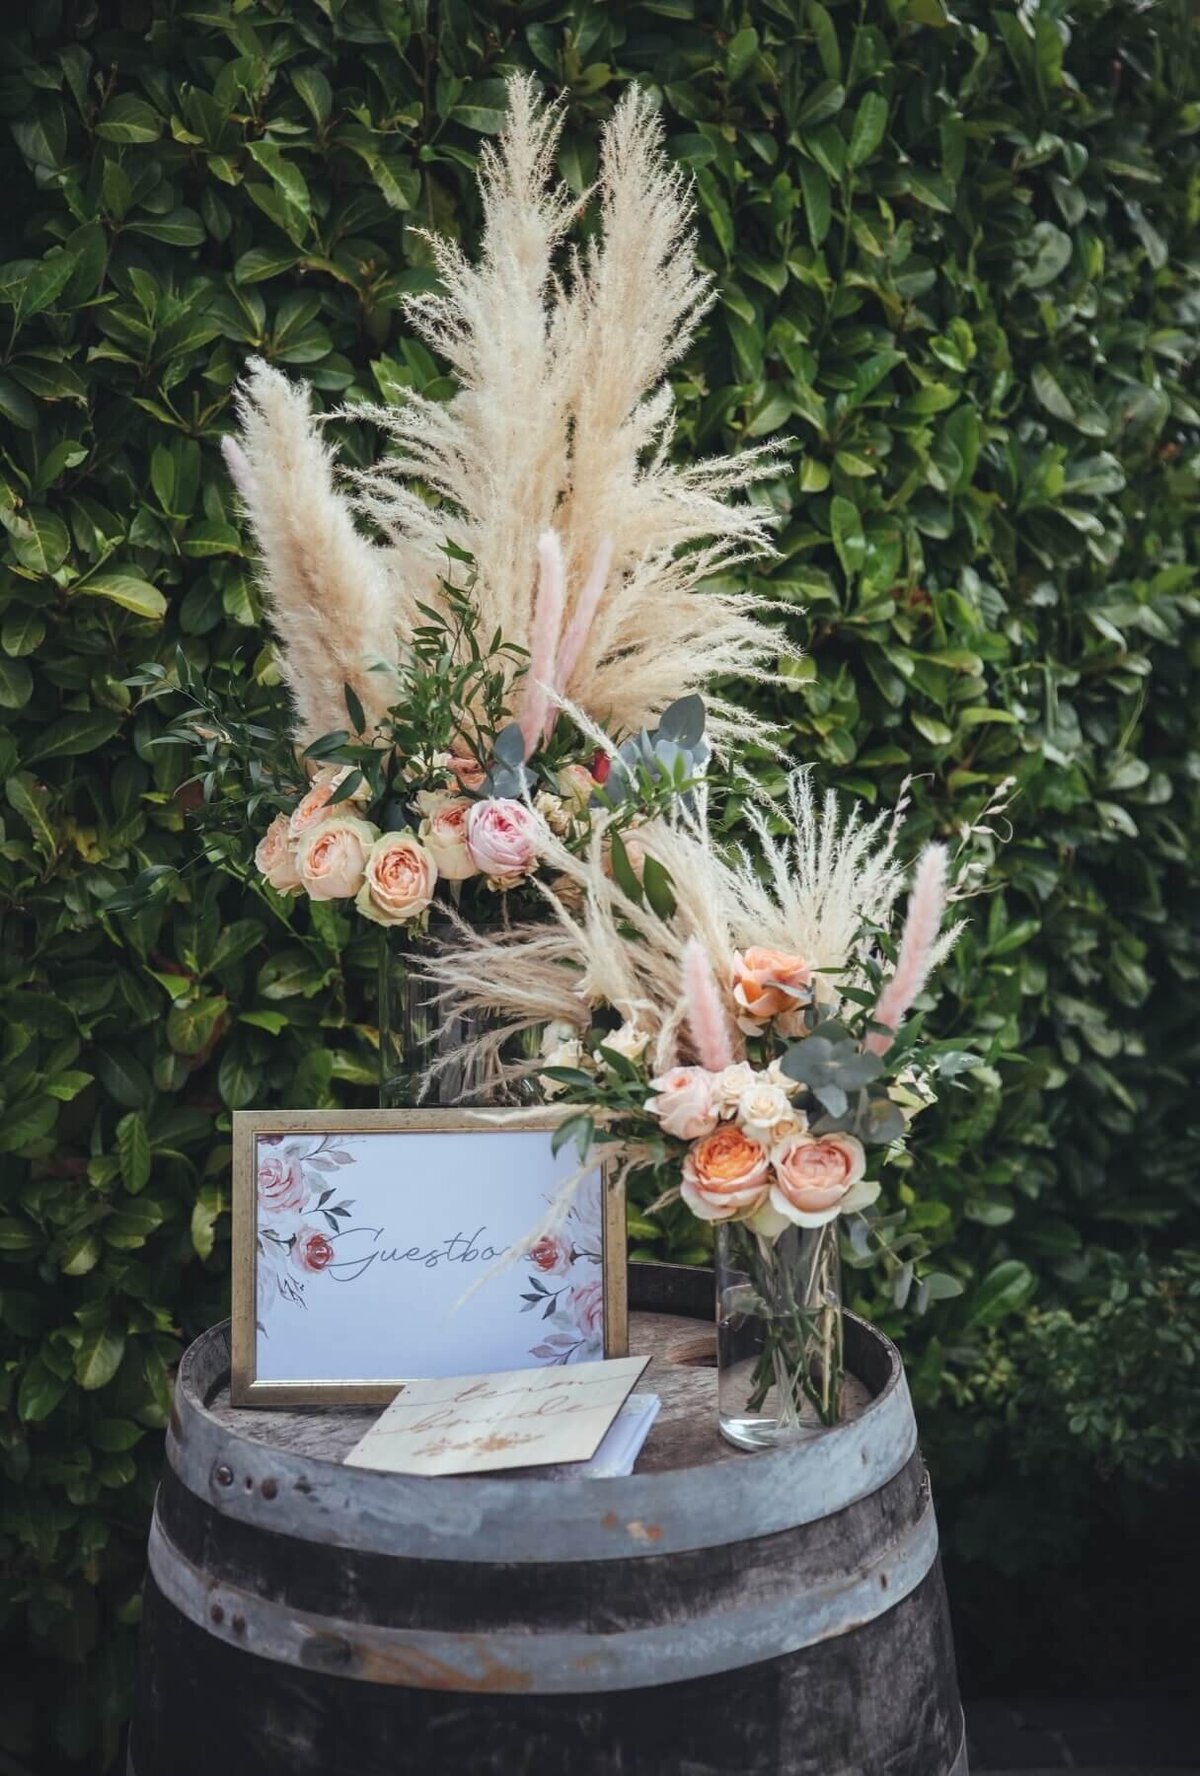 Wedding Flowers with roses and pampas grass with gold framed sign on a wooden barrel